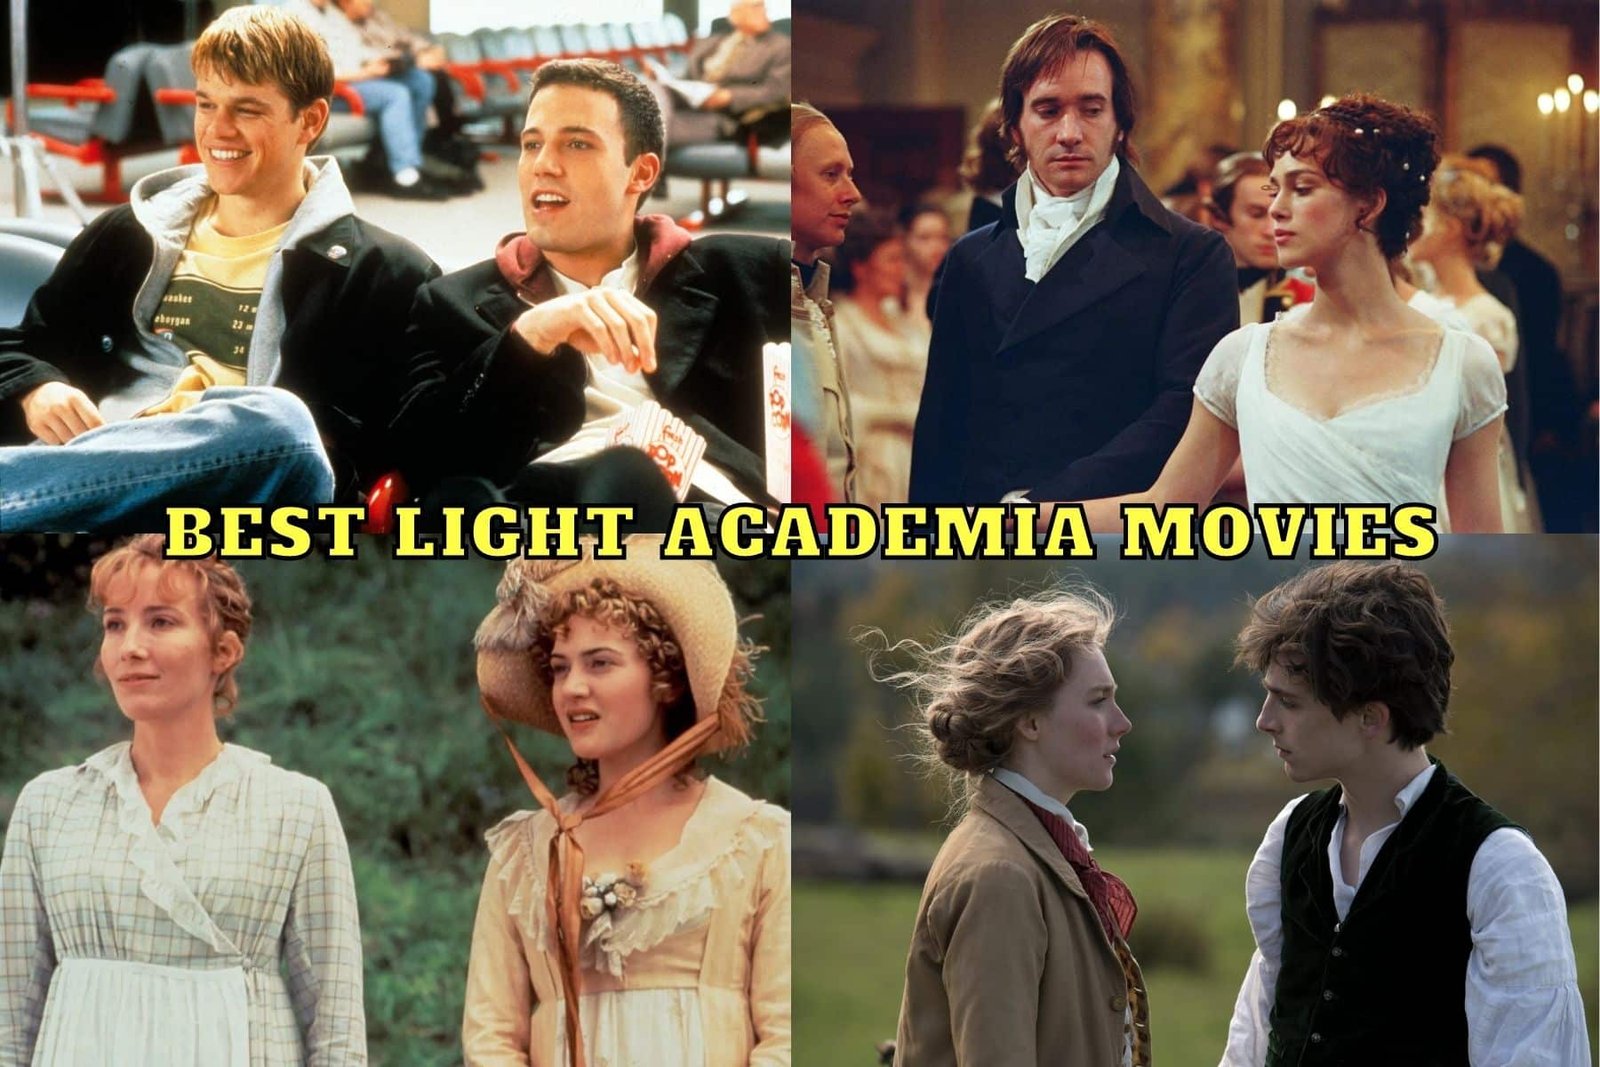 Best Light Academia Movies to Watch in 2022